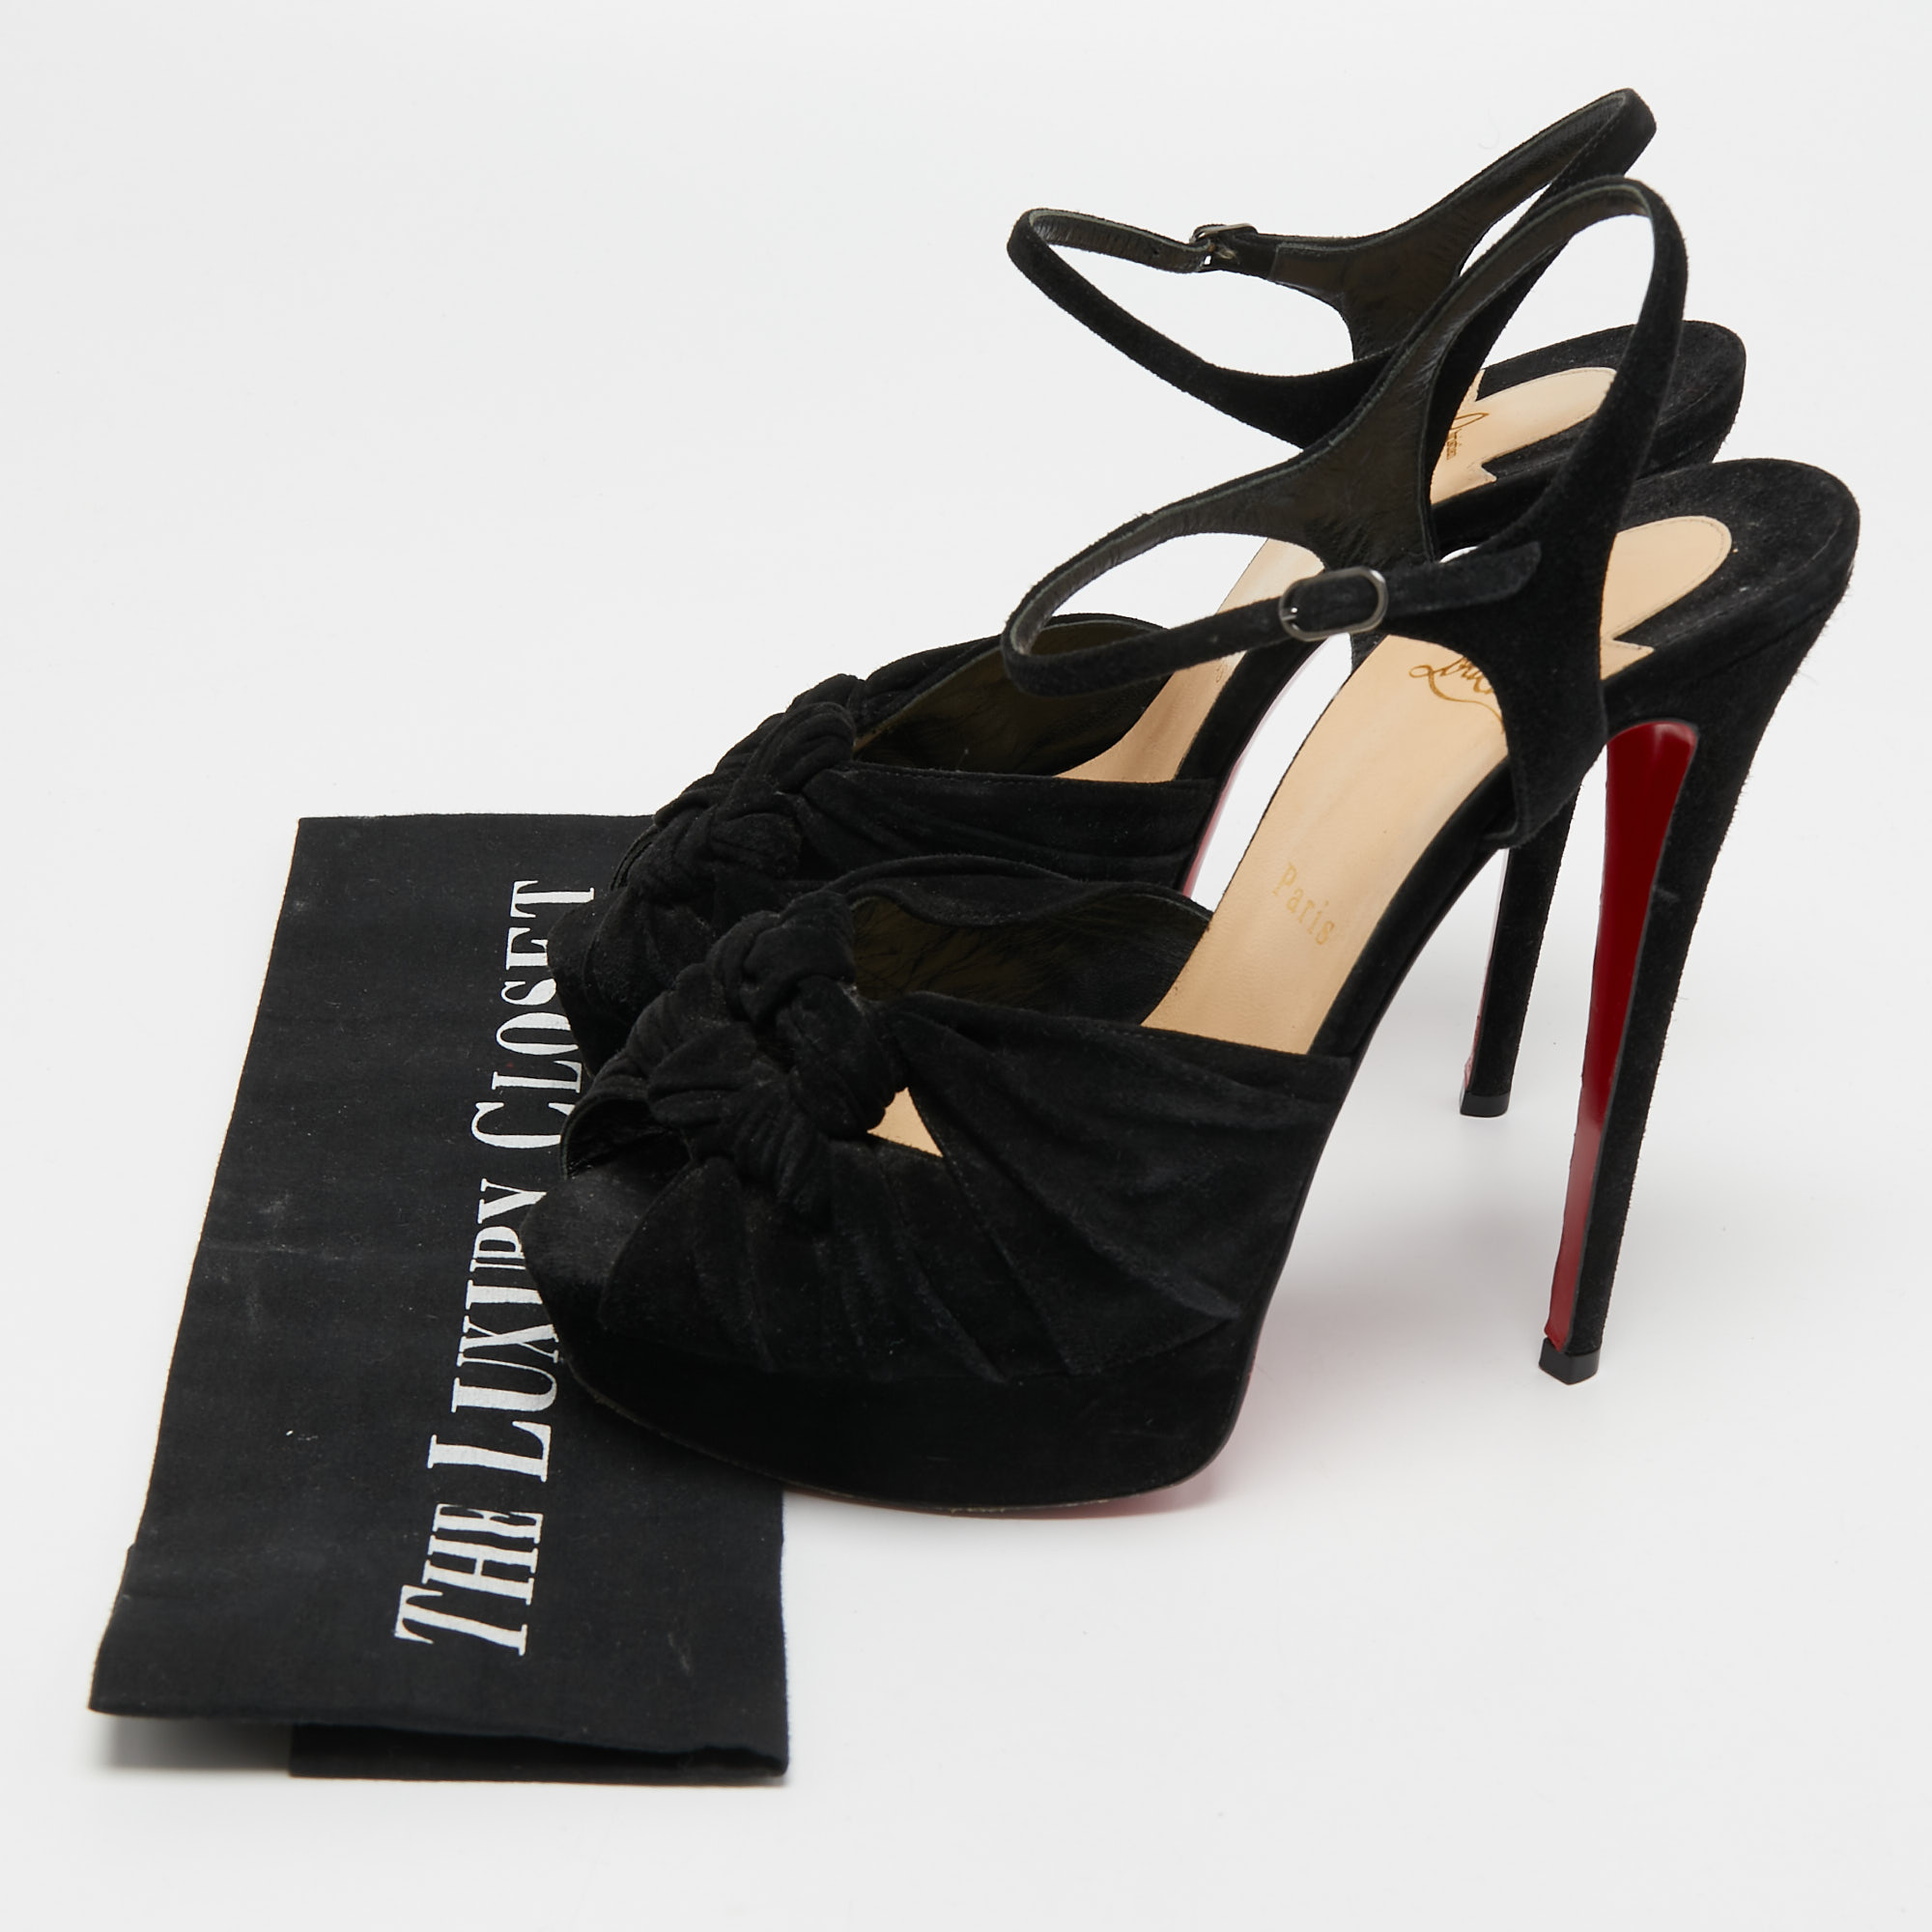 Christian Louboutin Black Knotted Suede Loescadiva Ankle Strap Sandals Size 39.5